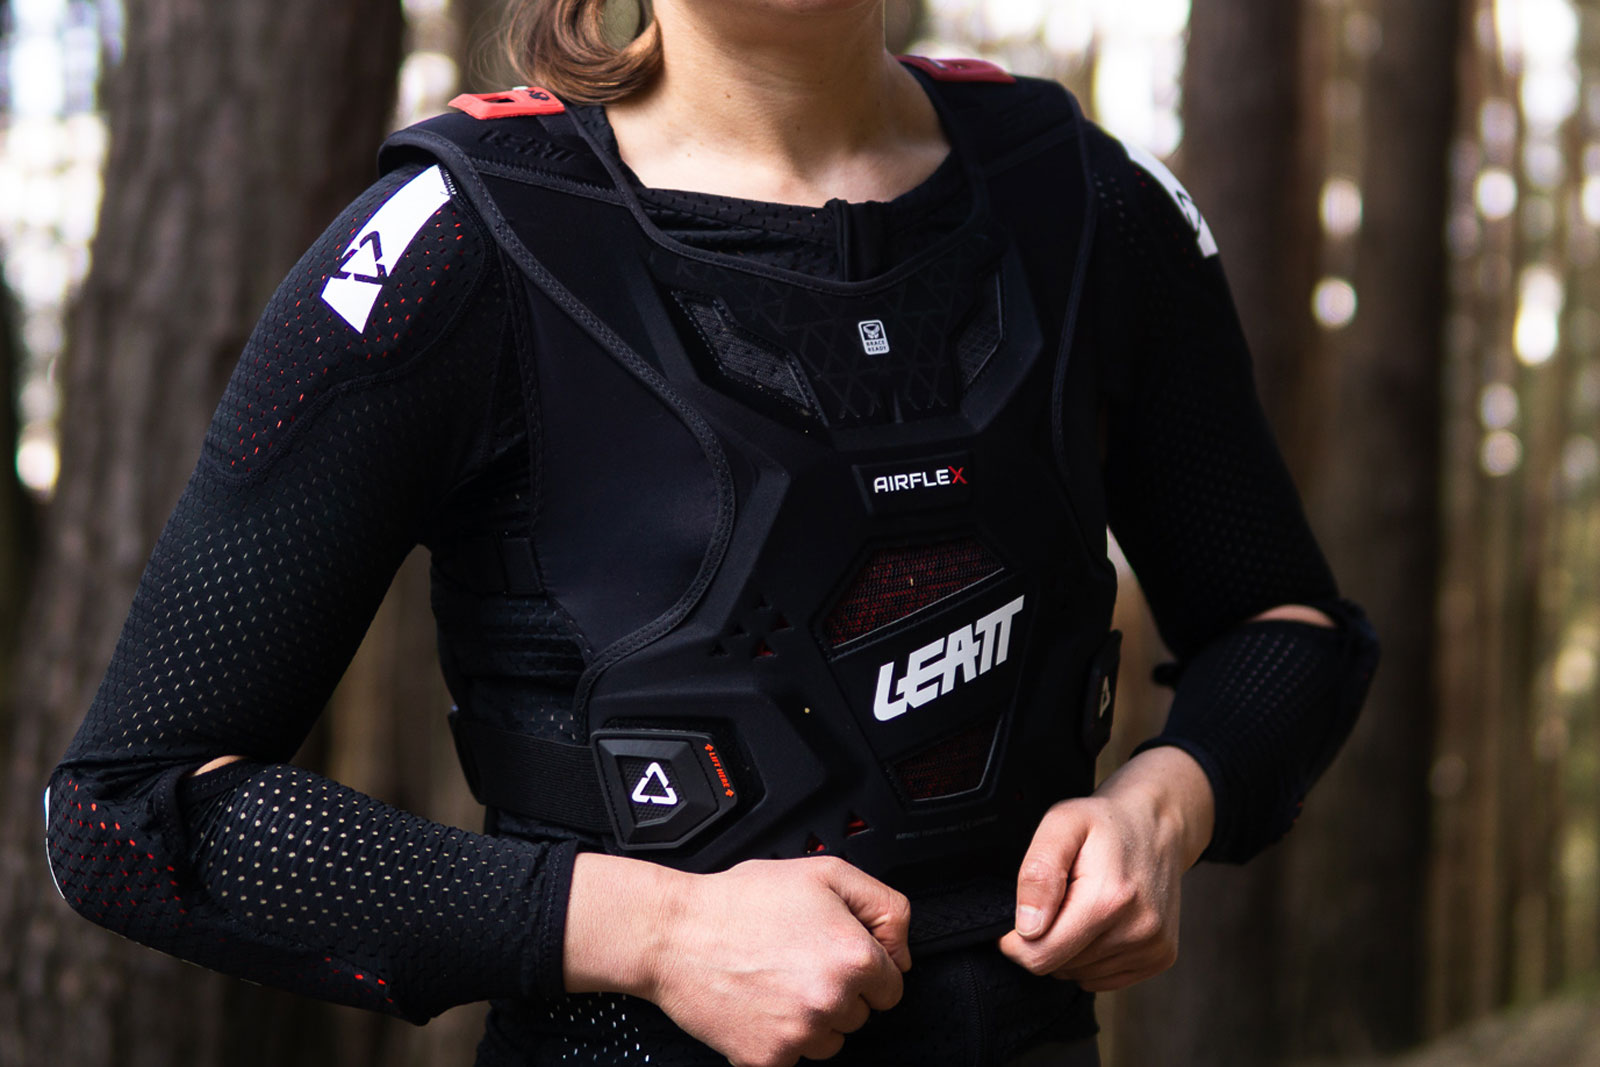 Hard enduro body protection recommendations as lady rider » The